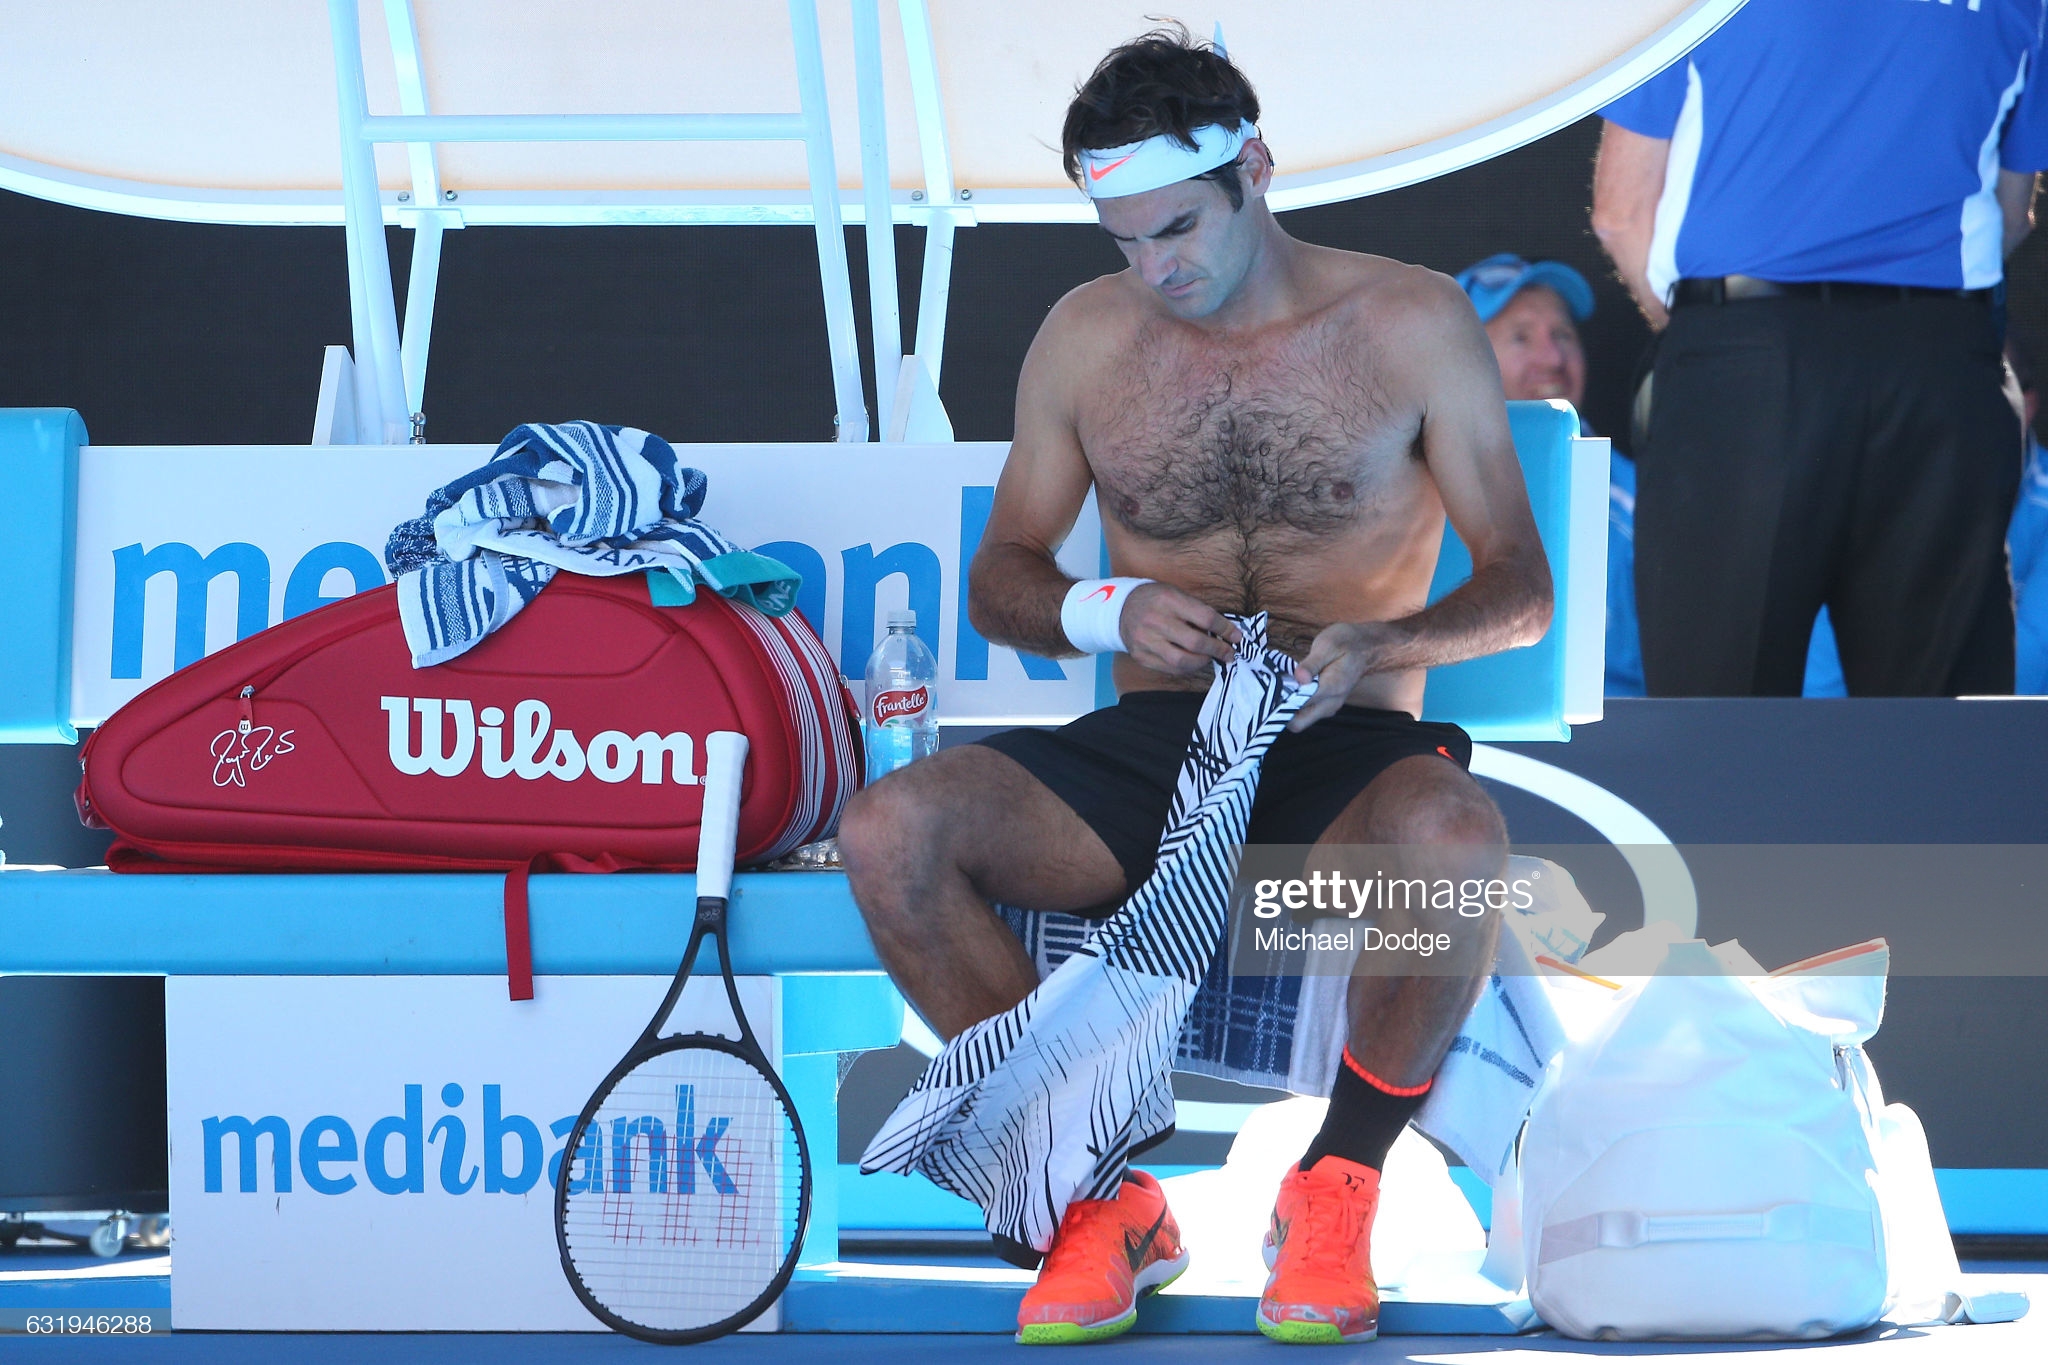 Roger Federer Stuns The World With A Shirtless Picture